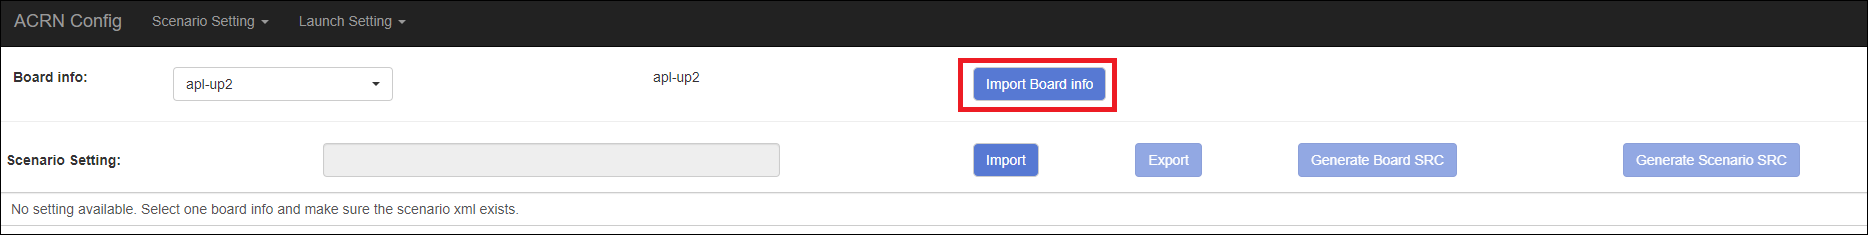 ../_images/click_import_board_info_button.png